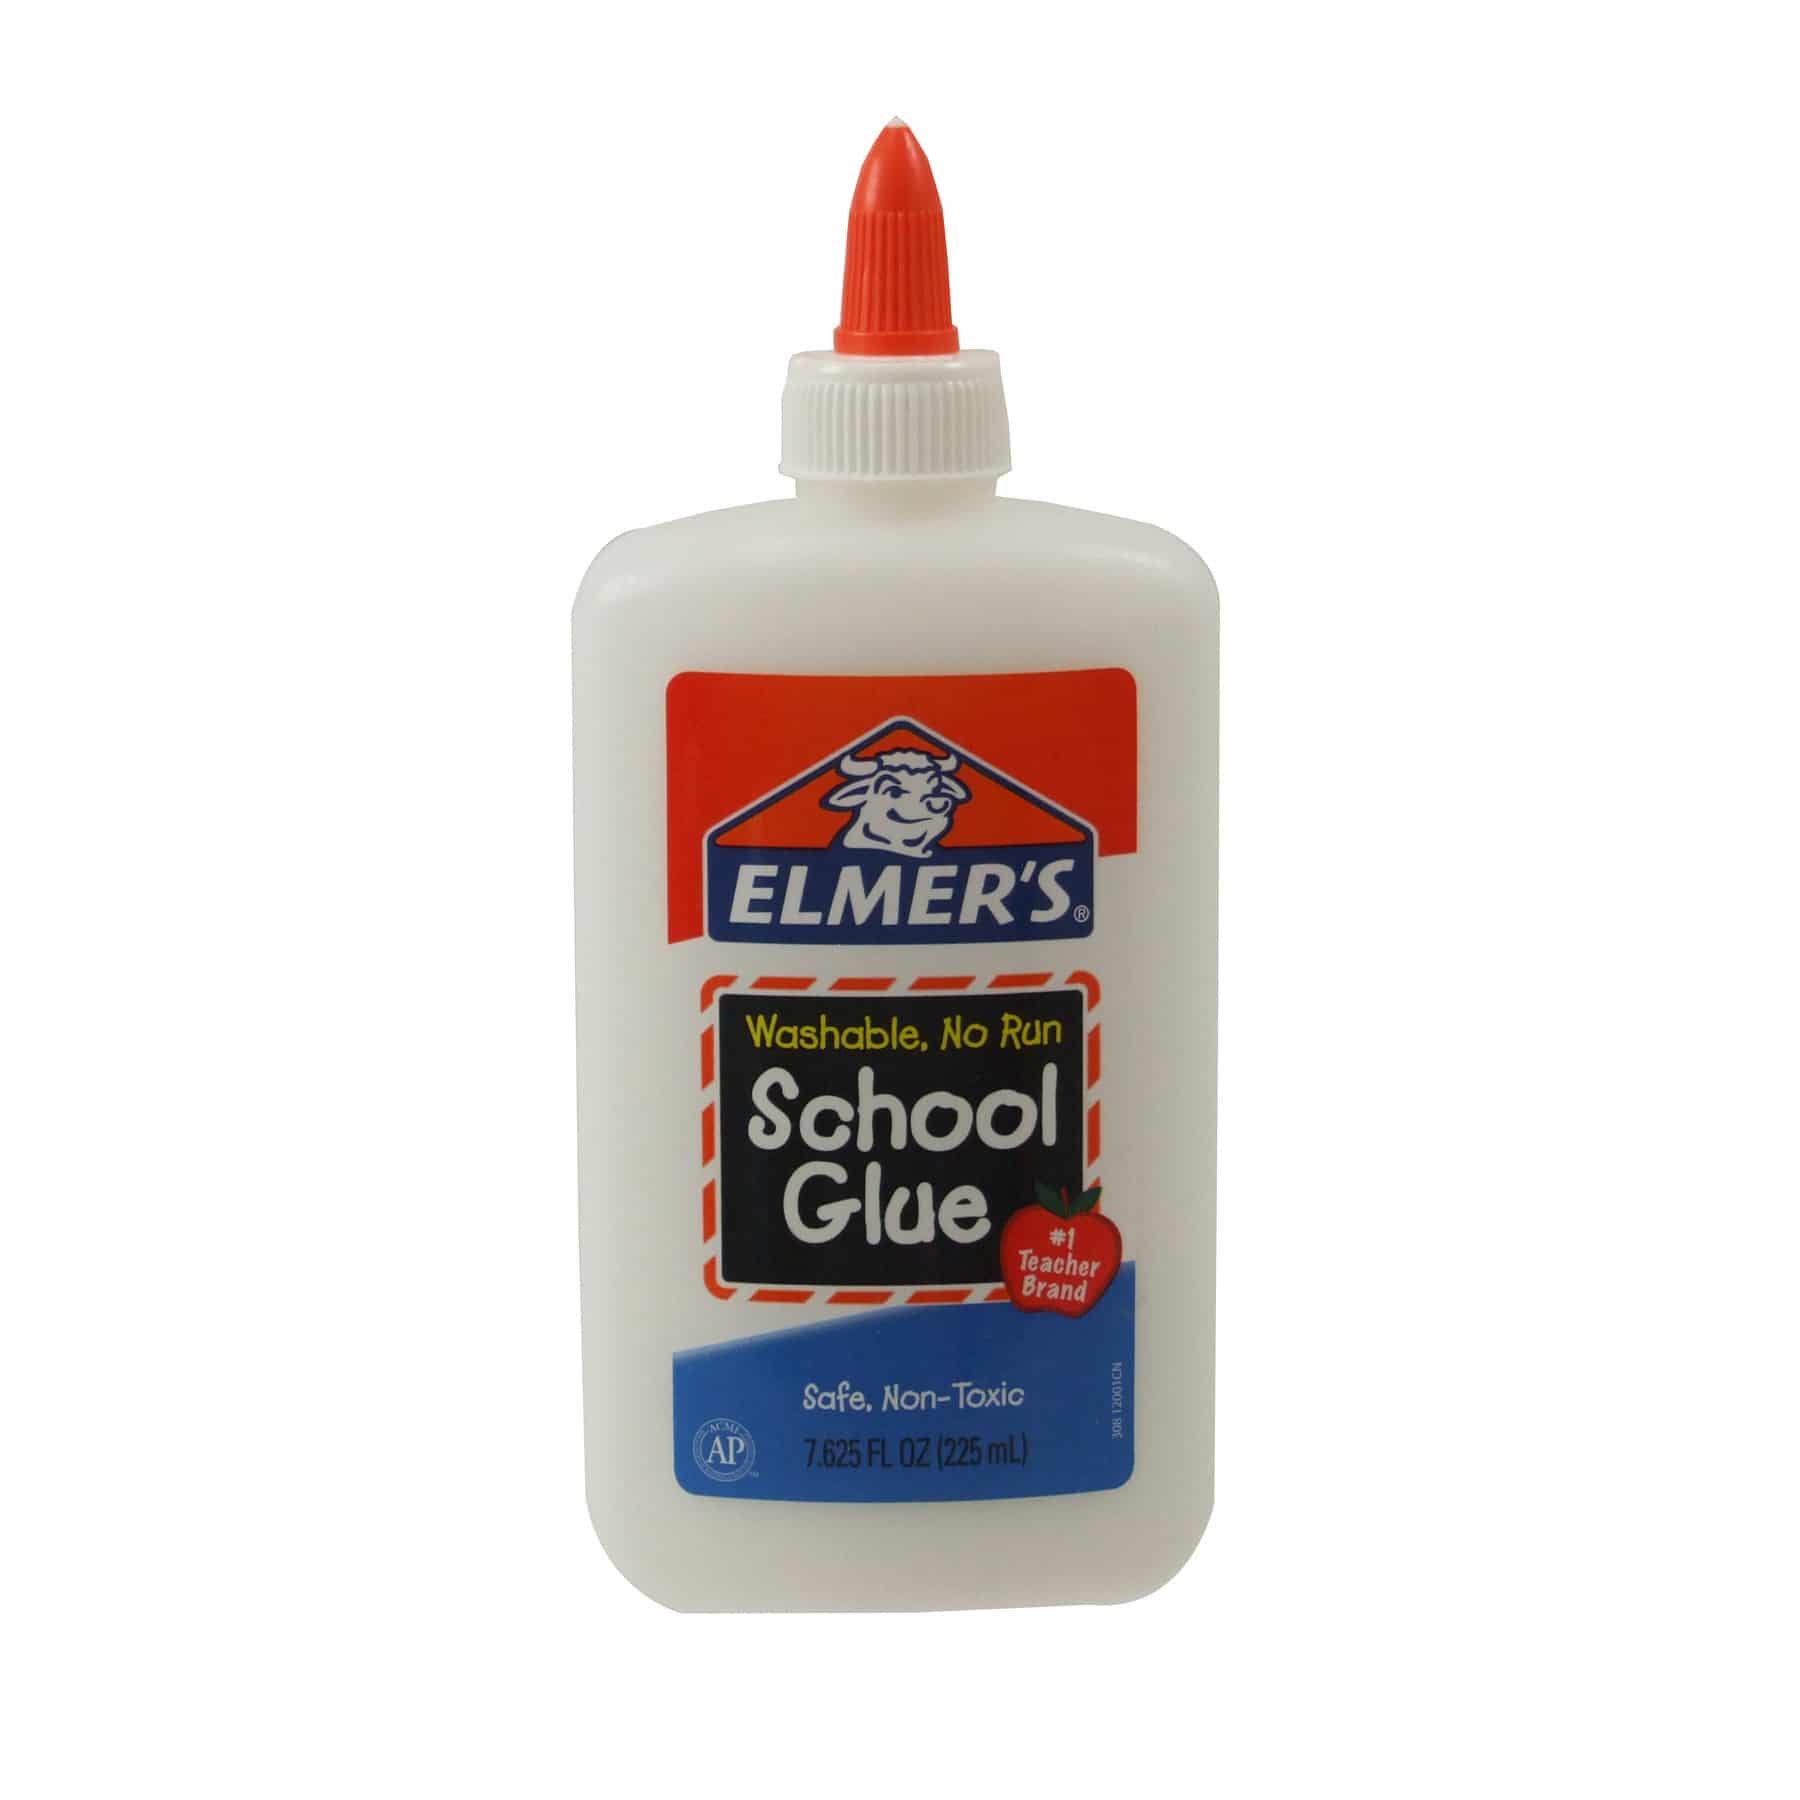 How to get Elmers glue out of carpet